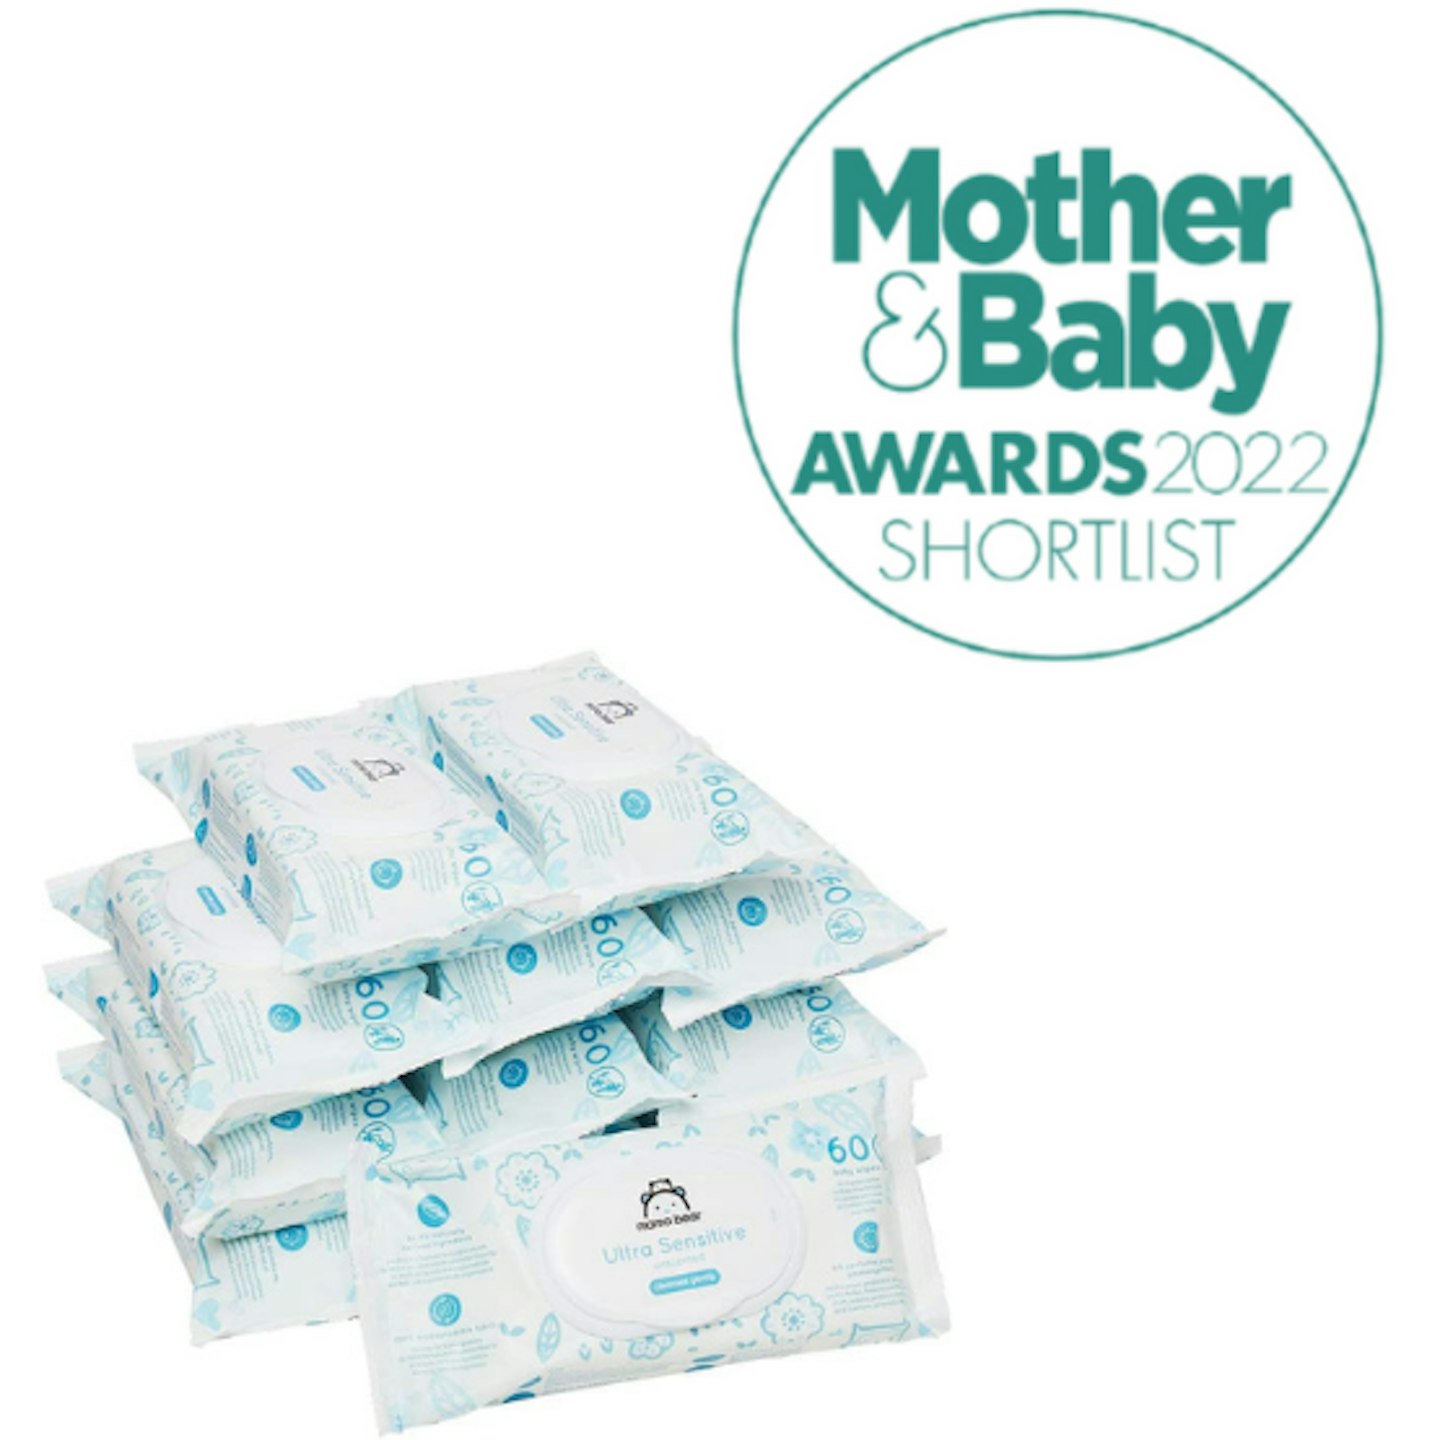 Brand – Mama Bear Sensitive Unscented baby wipes– Pack of 18 (Total 1008  wipes)